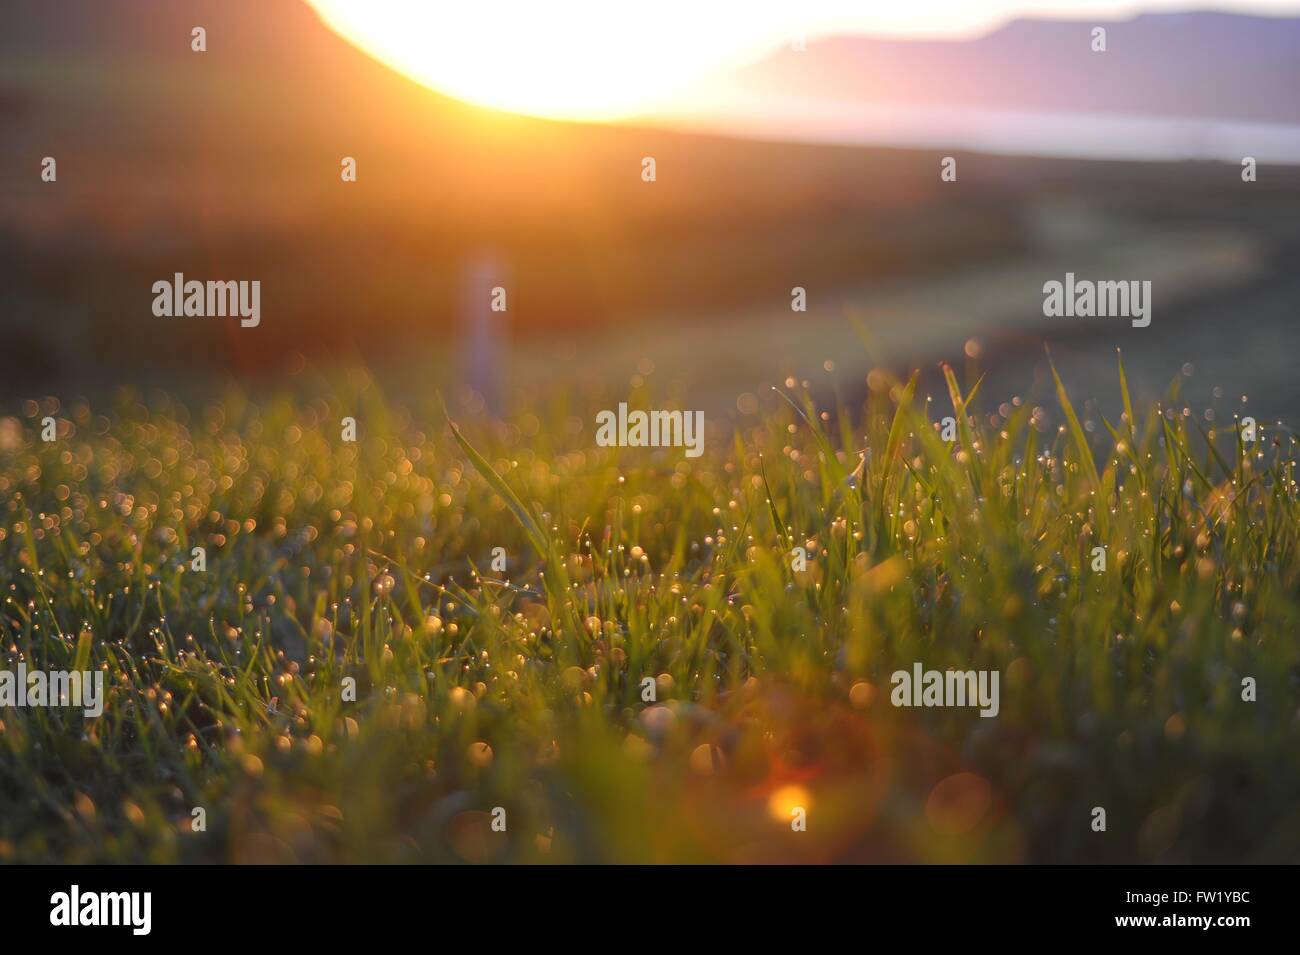 Dewdrops on grass at sunset Stock Photo